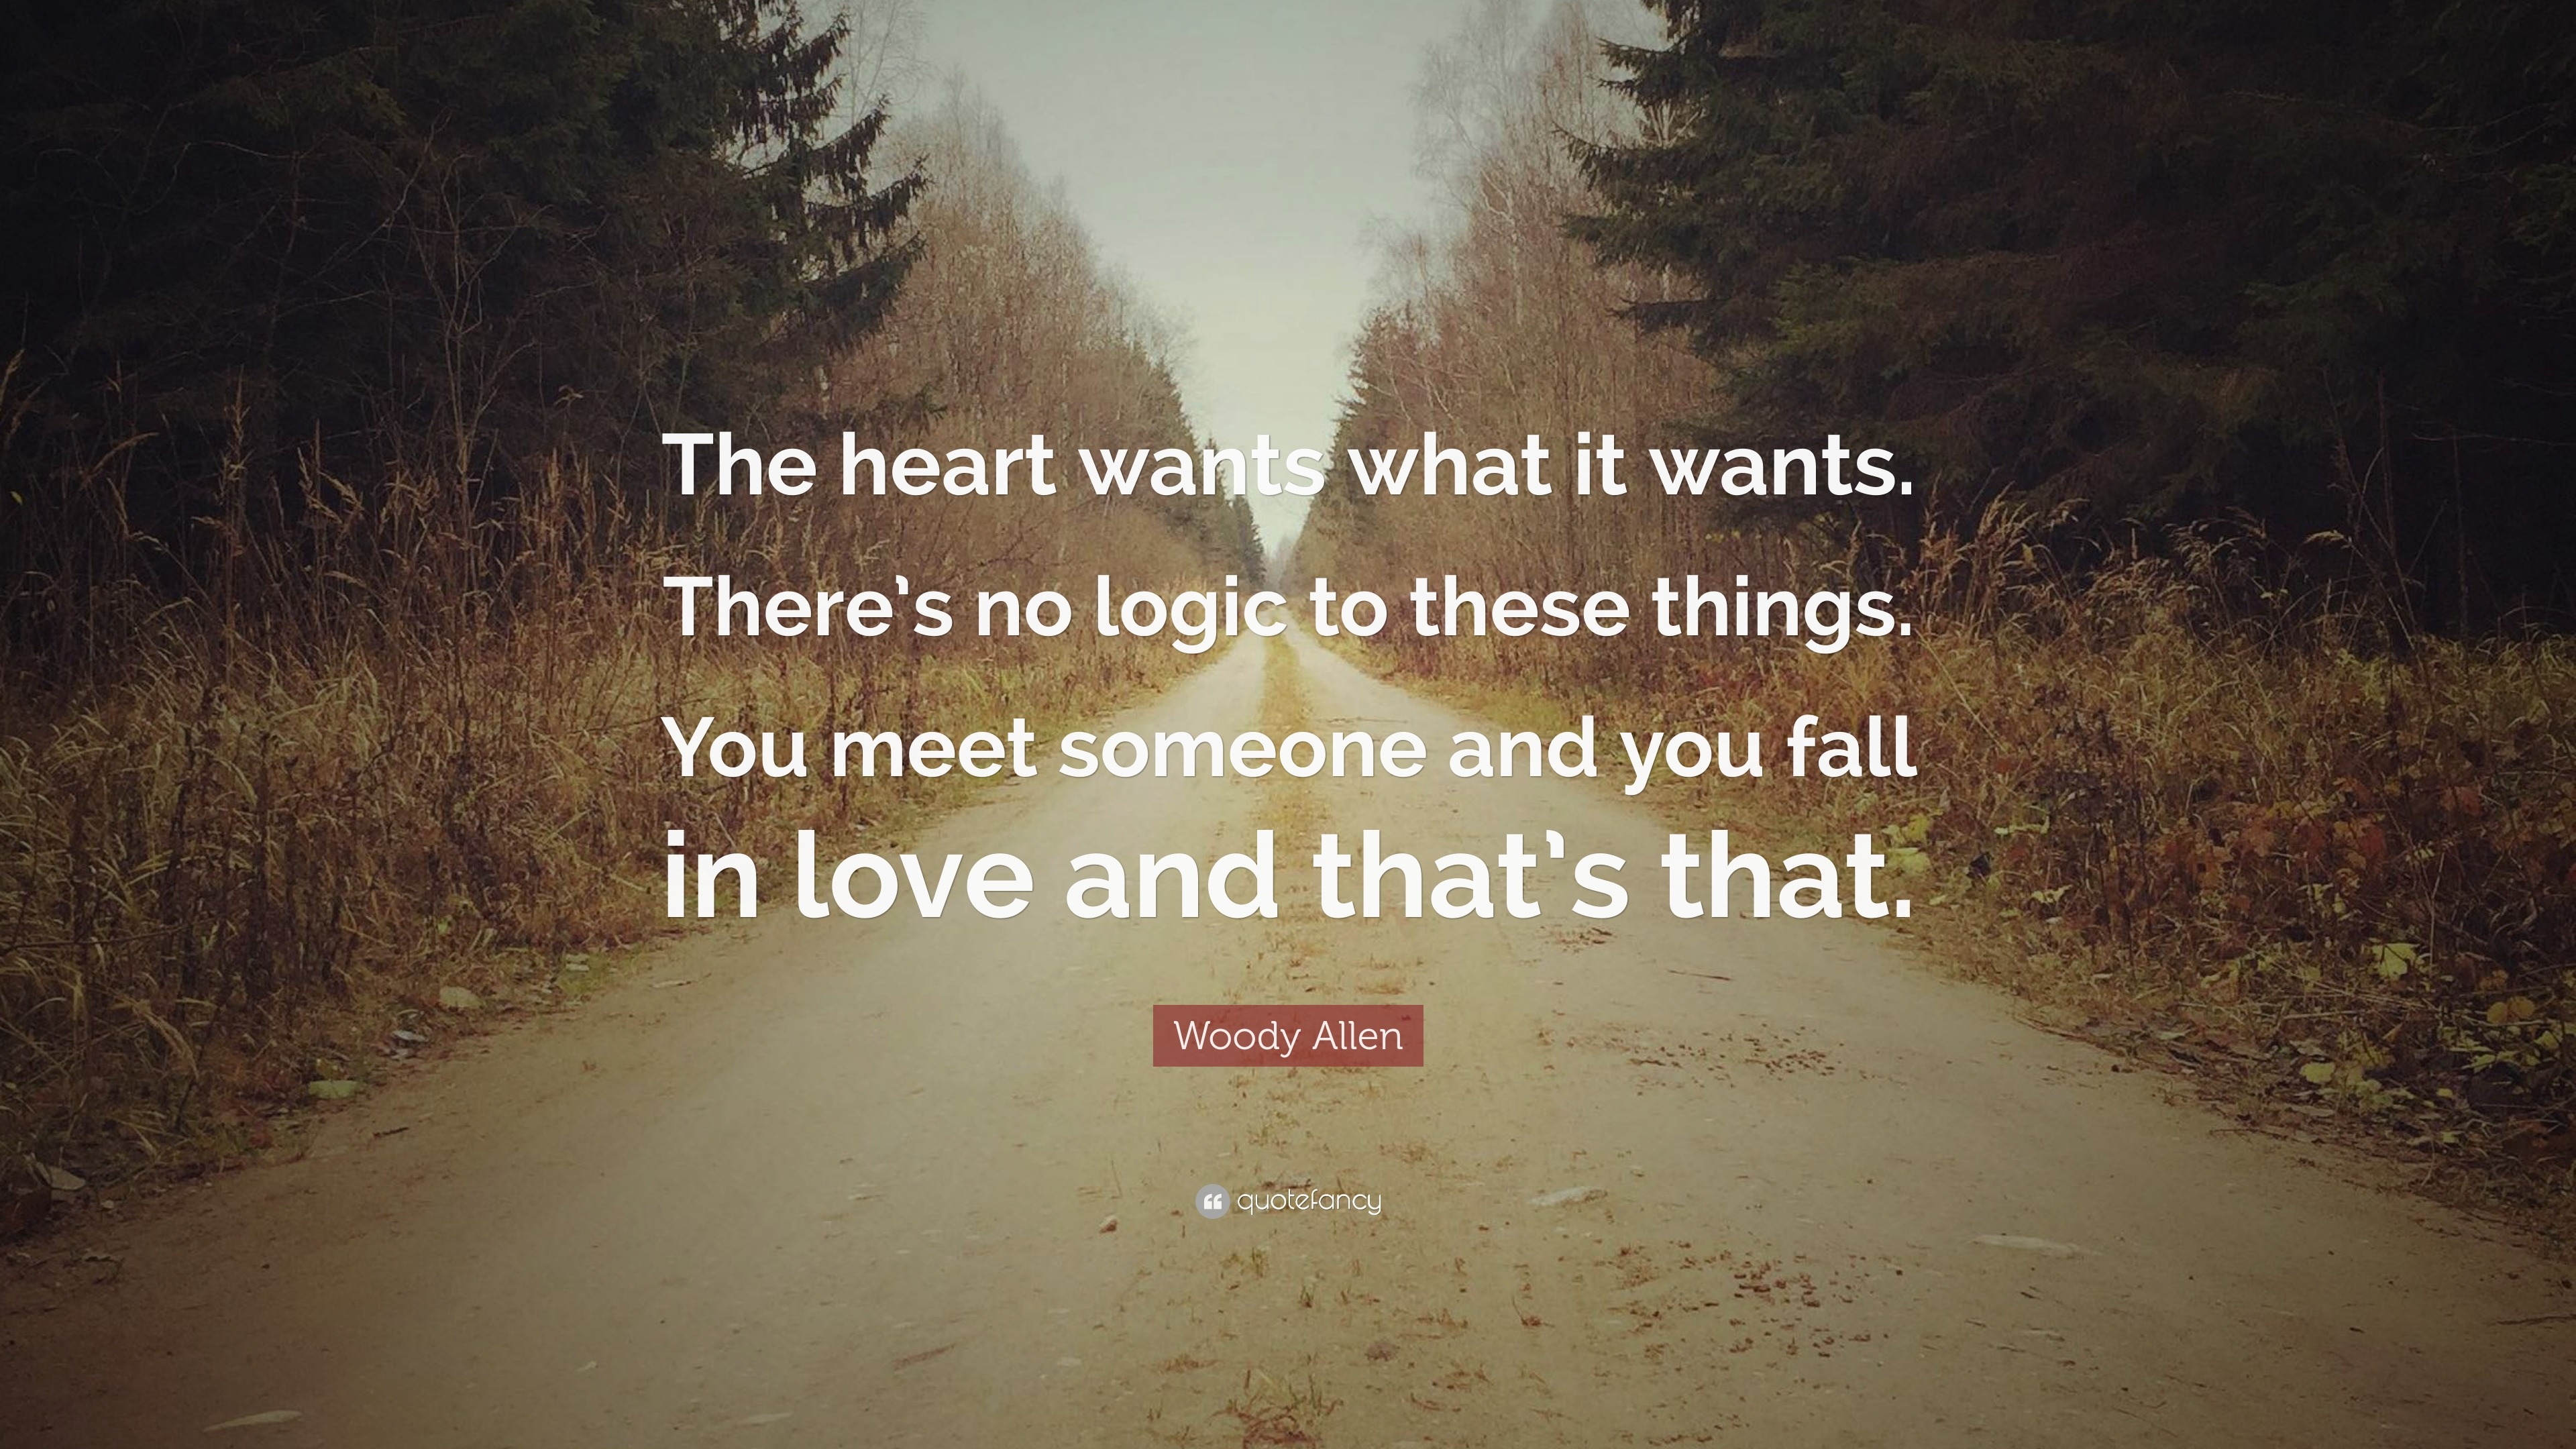 Great The Heart Wants What The Heart Wants Quote  Don t miss out 